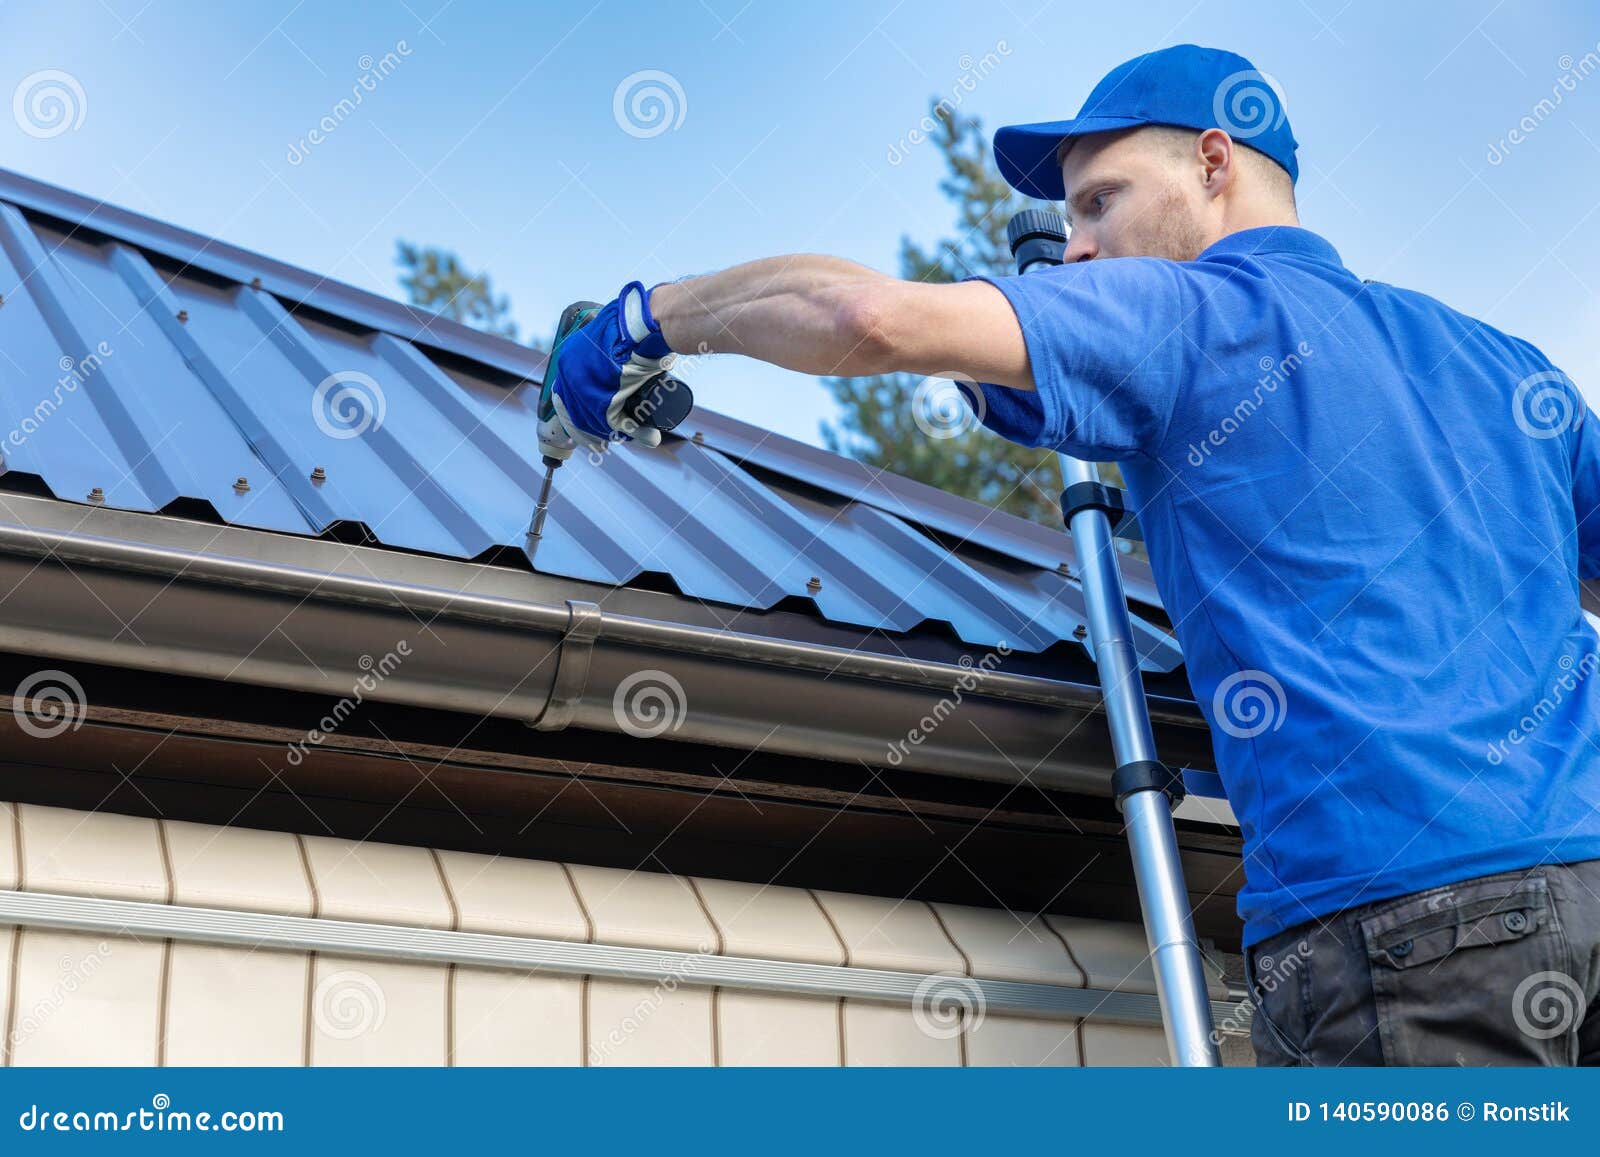 metal roofing - roofer working on the house roof